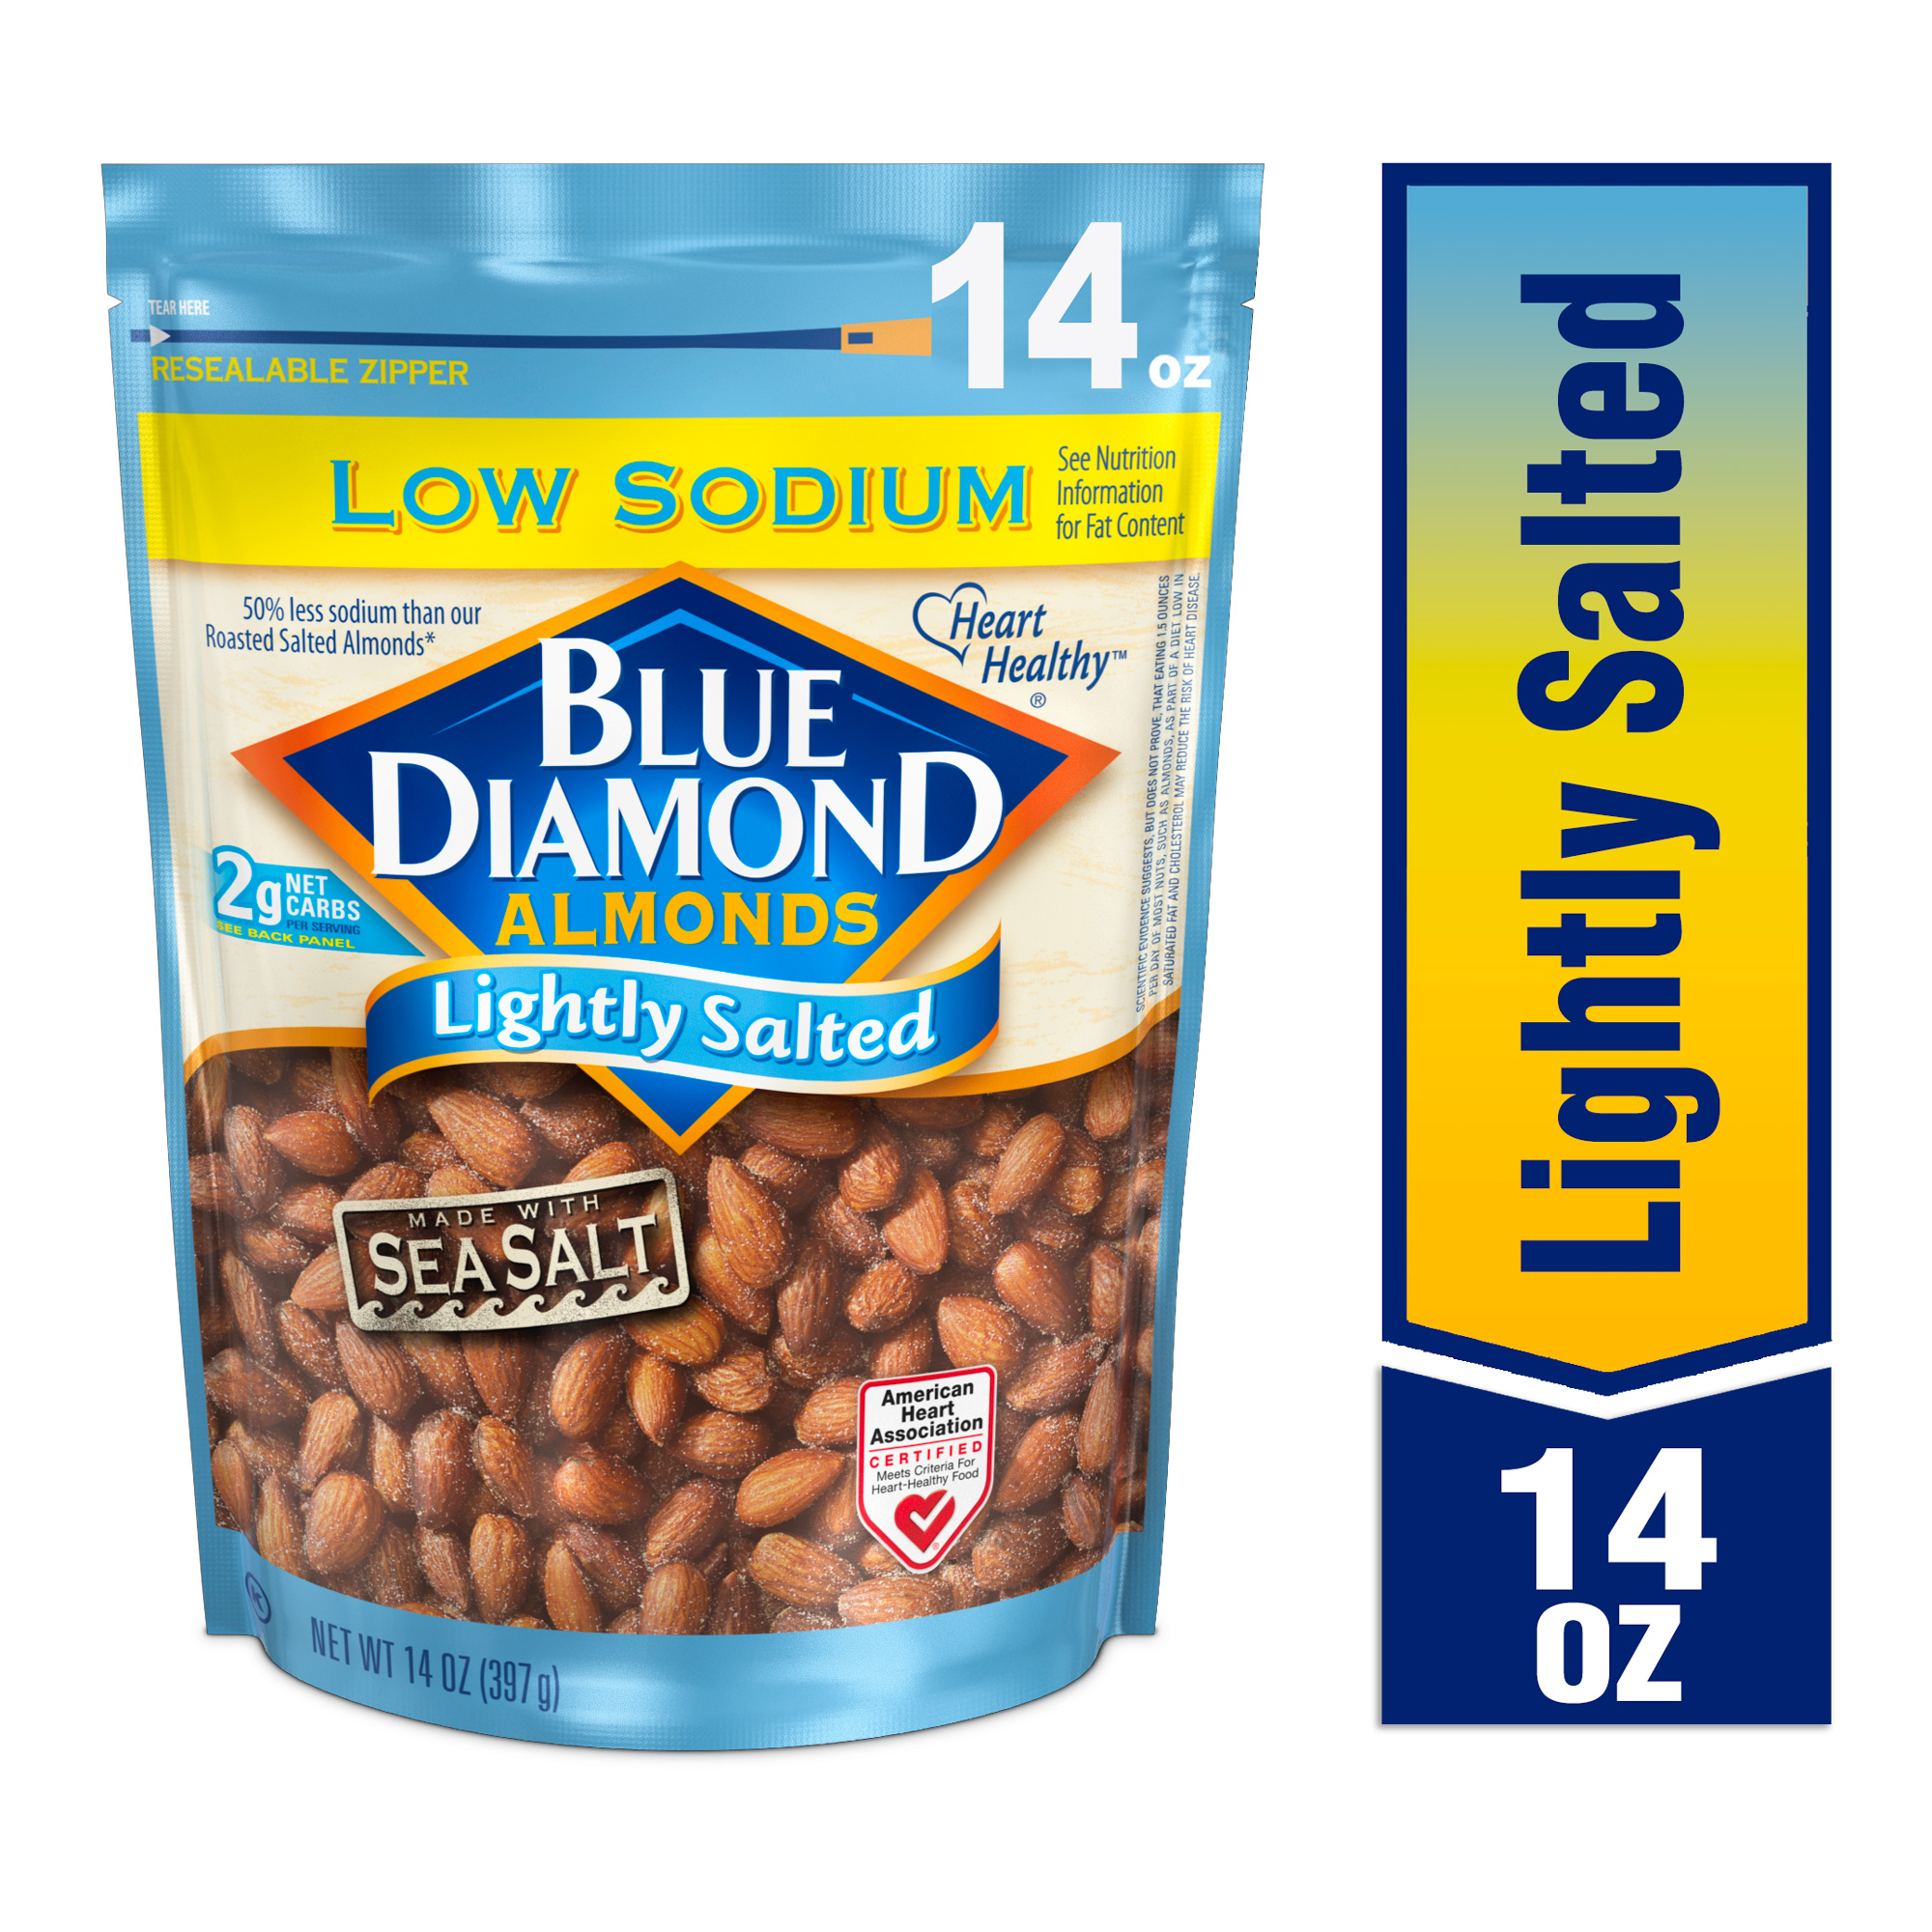 Blue Diamond Almonds, Lightly Salted Flavored Snack Nuts Perfect for Healthy Snacking, 14 oz - image 1 of 7